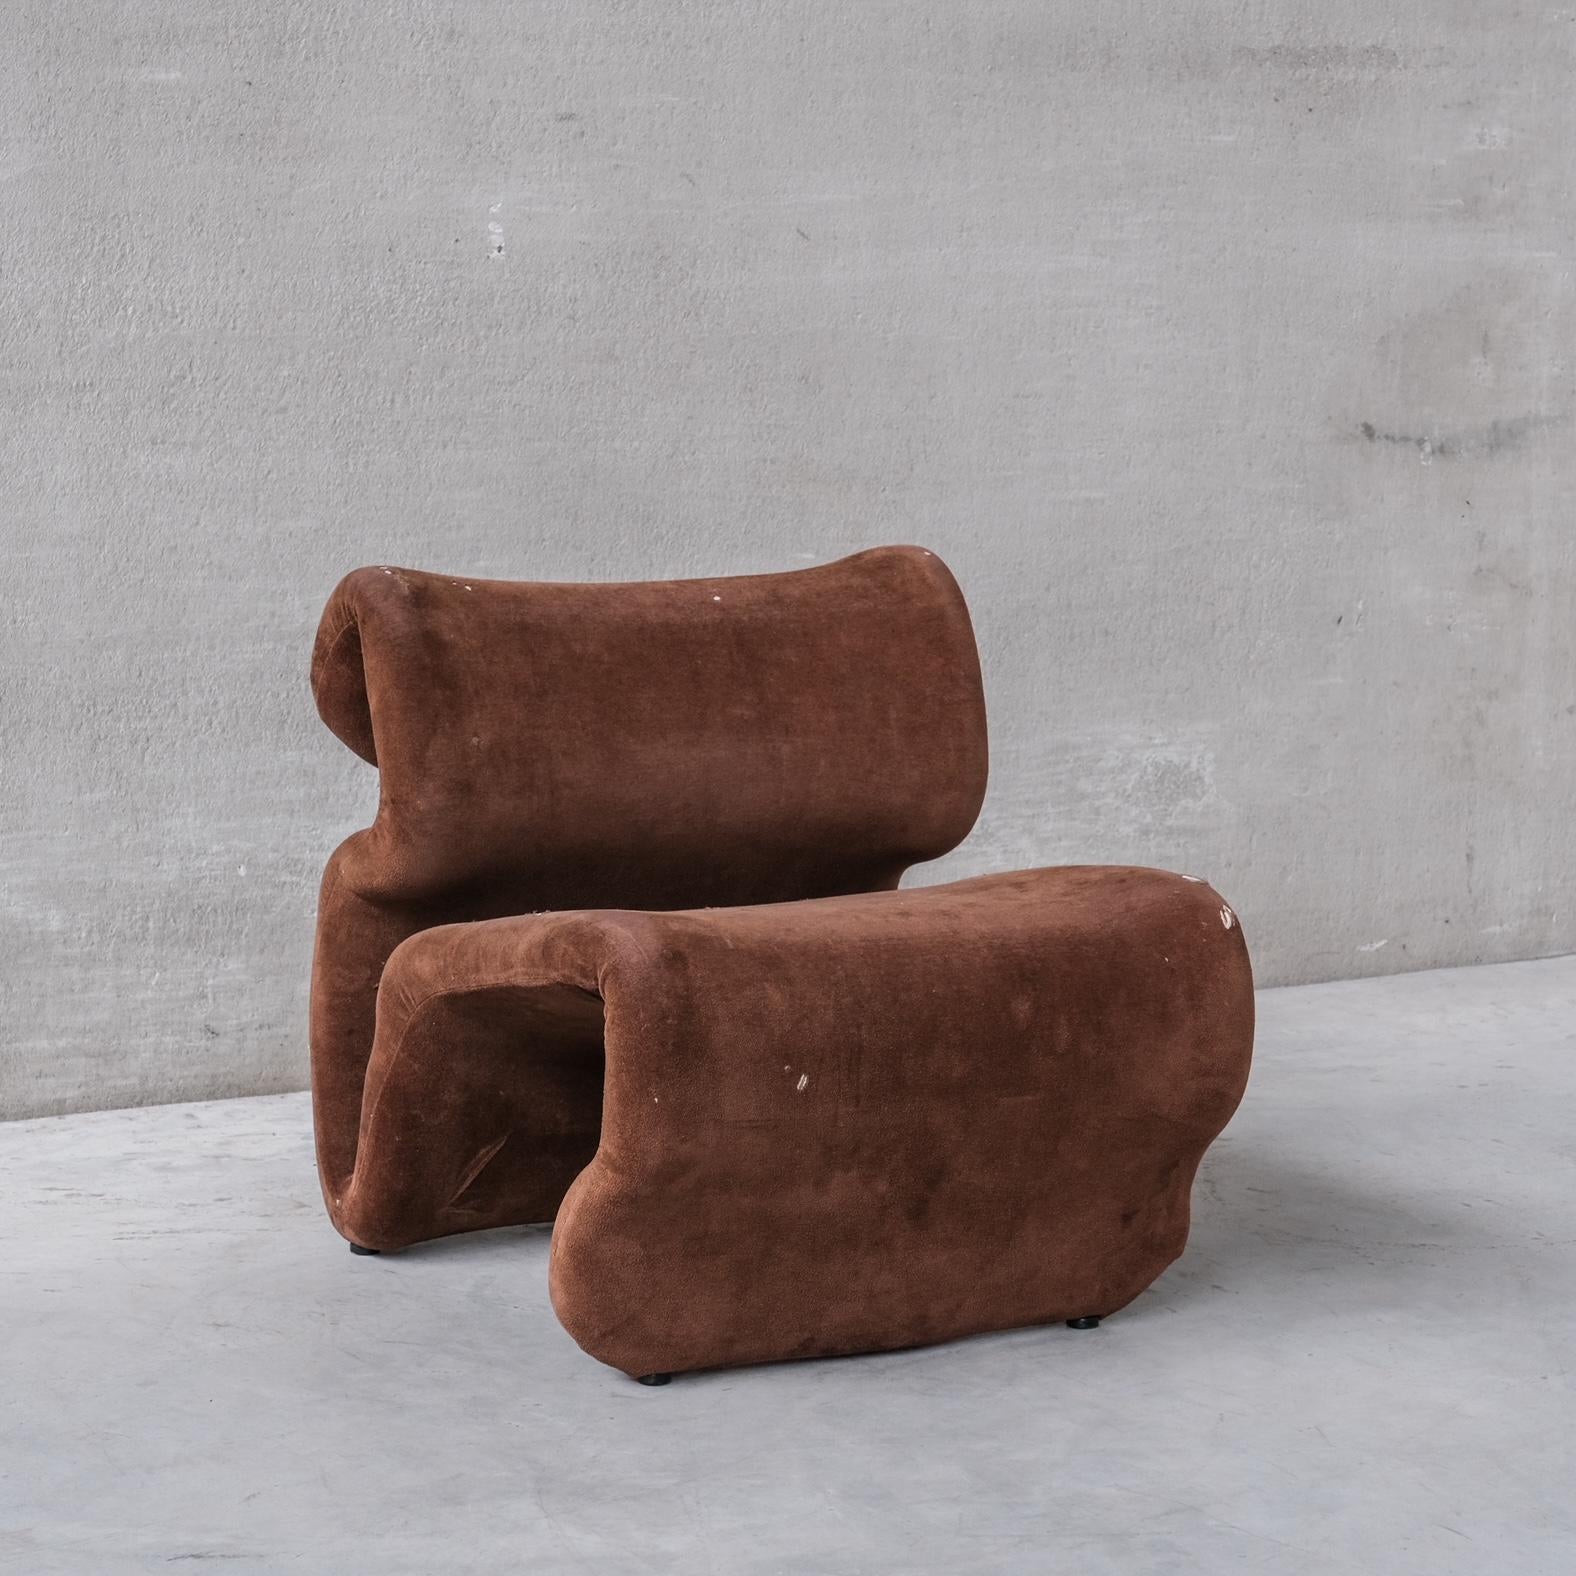 Fabric Jans Ekselius 'Etcetera' Midcentury Lounge Chair '3 Available'